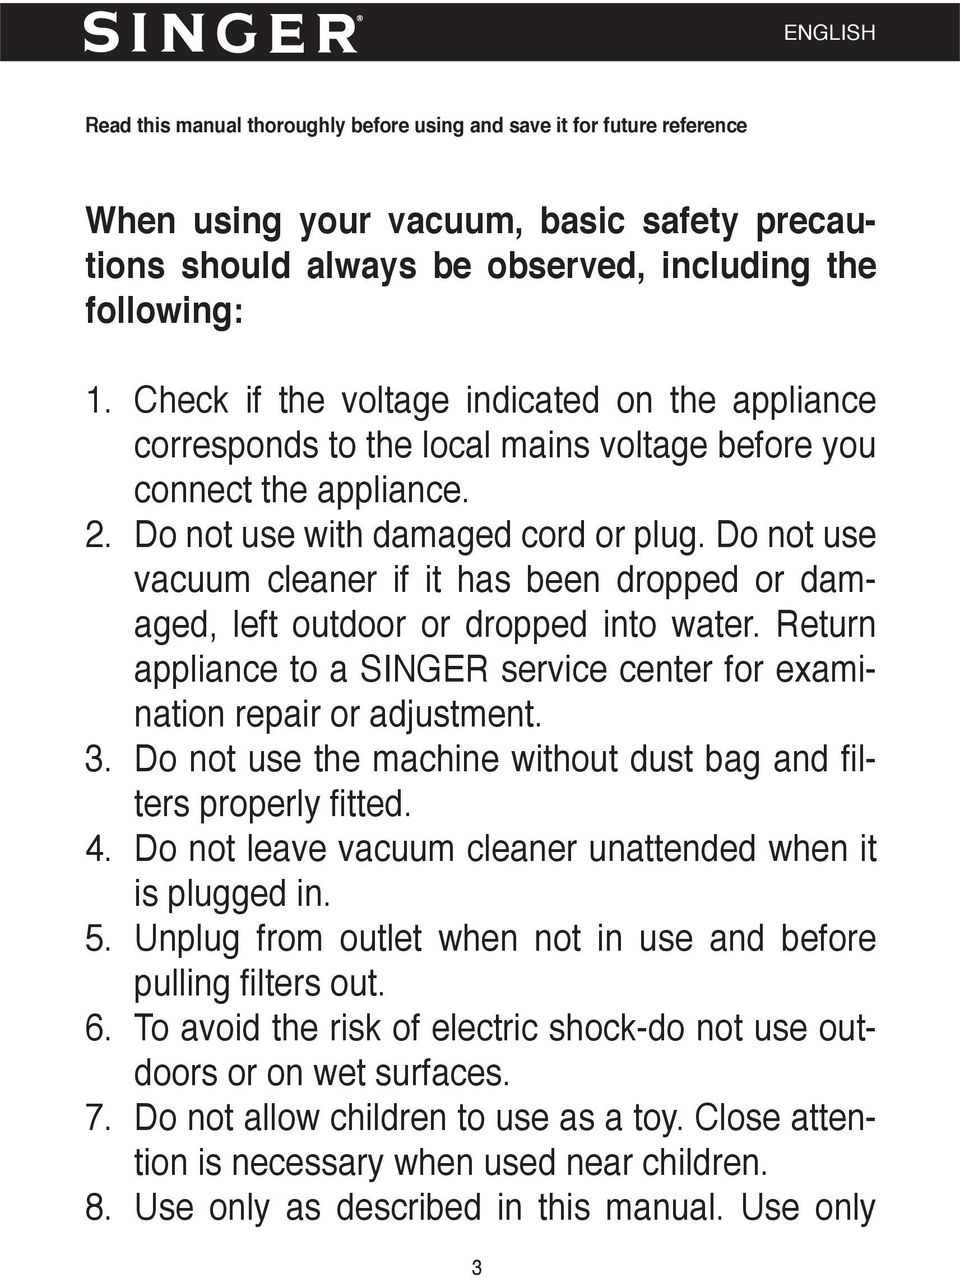 Do not use vacuum cleaner if it has been dropped or damaged, left outdoor or dropped into water. Return appliance to a SINGER service center for examination repair or adjustment. 3.